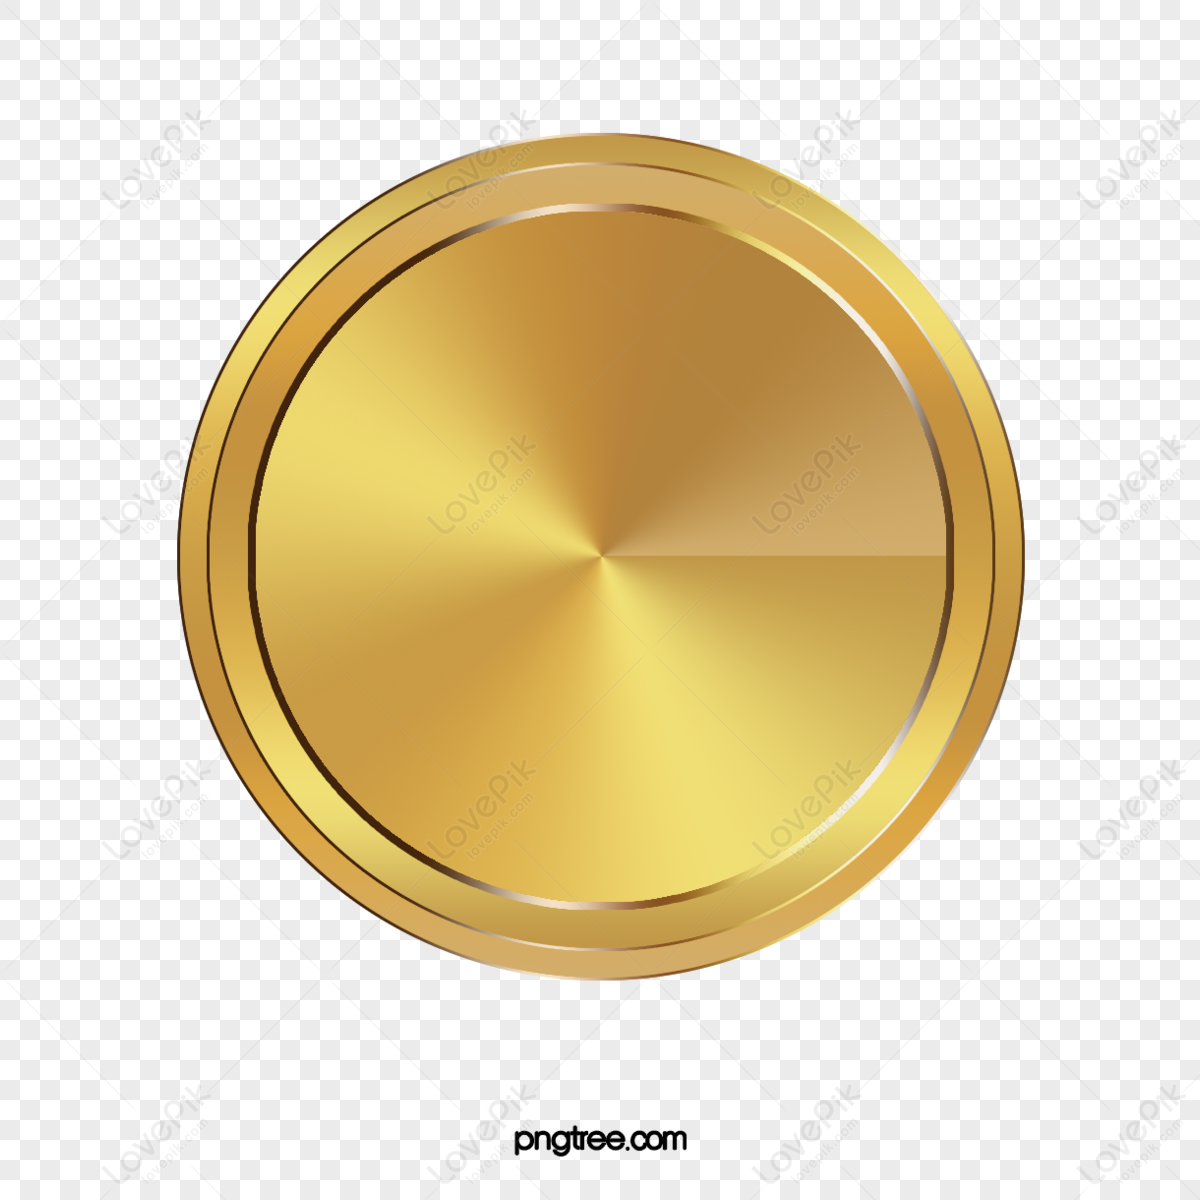 Golden Circle Gold,shine,air,simple Gold Medal PNG Hd Transparent Image ...